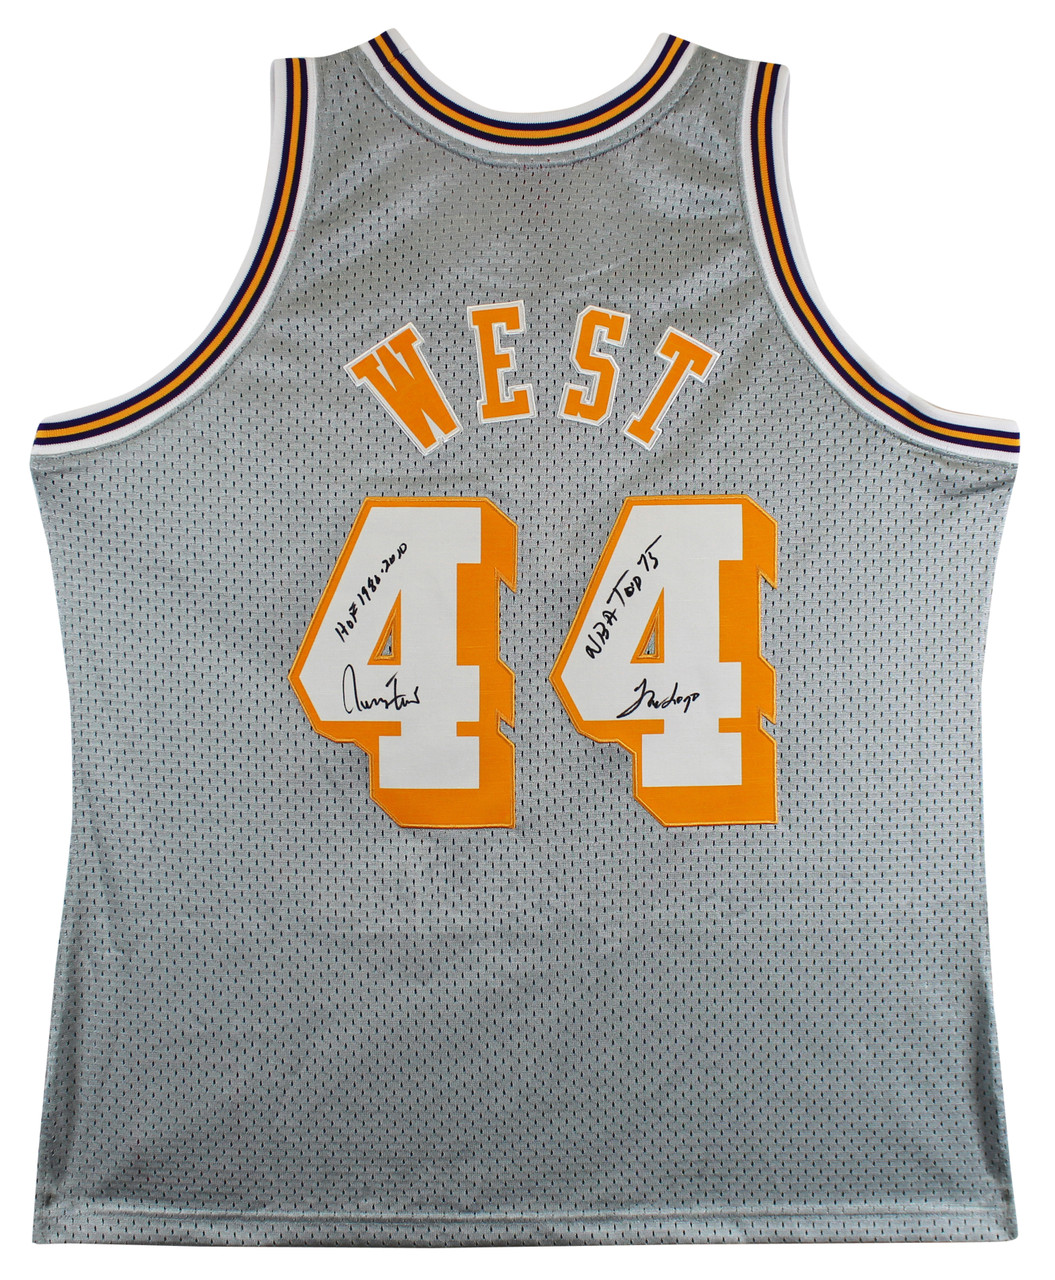 jerry west lakers jersey